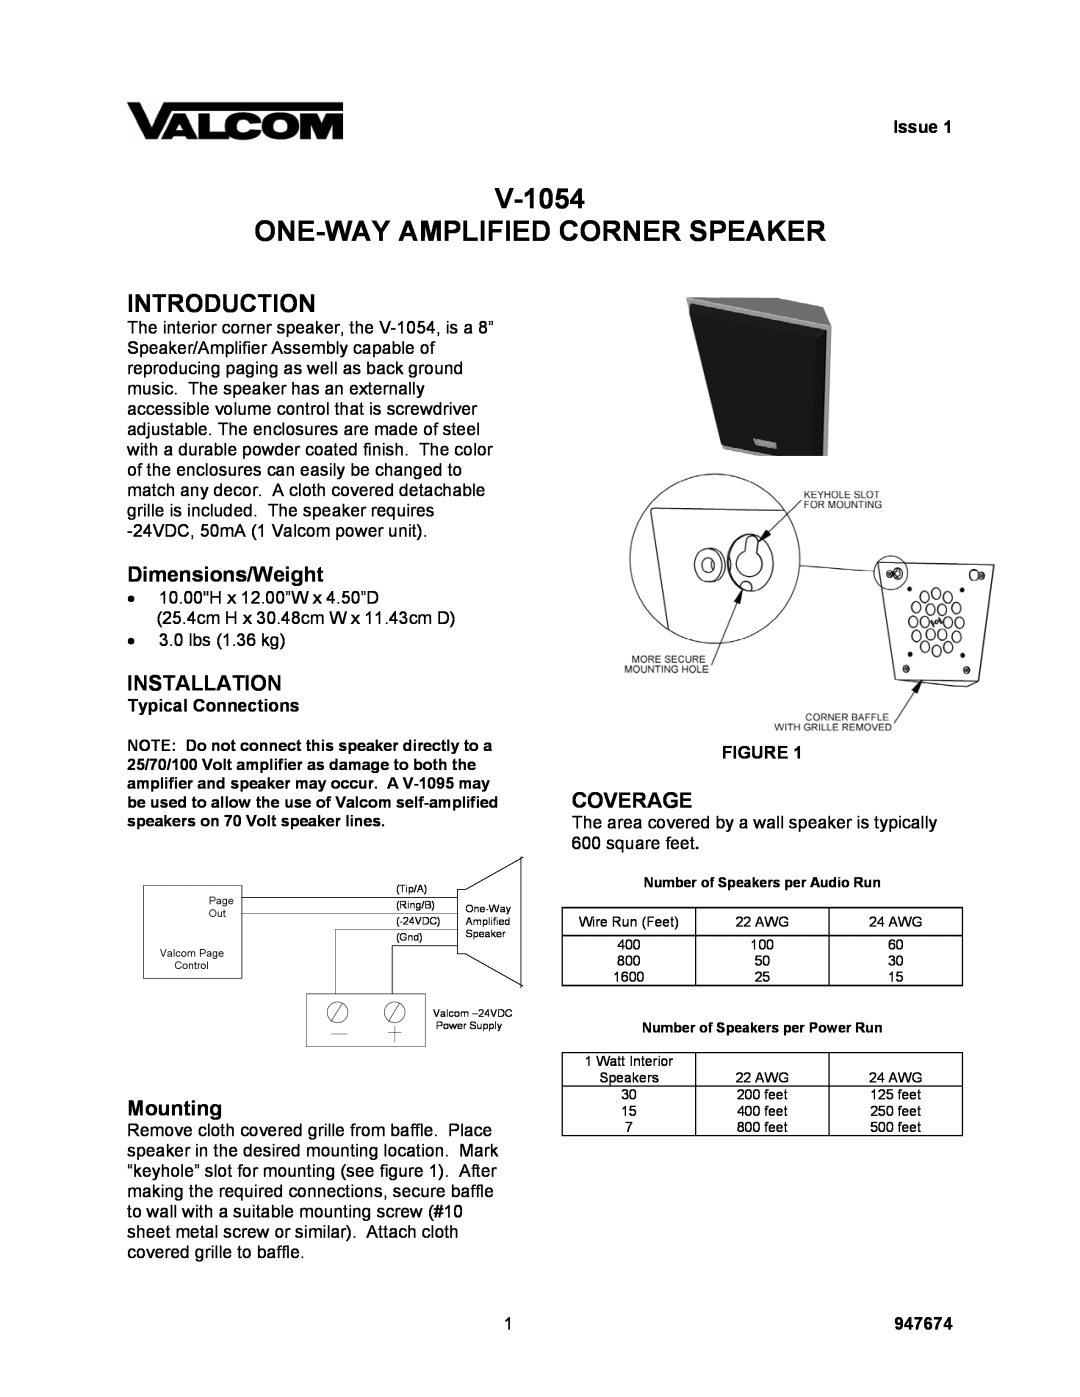 Valcom dimensions Introduction, Issue, Typical Connections, 947674, V-1054 ONE-WAYAMPLIFIED CORNER SPEAKER, Coverage 